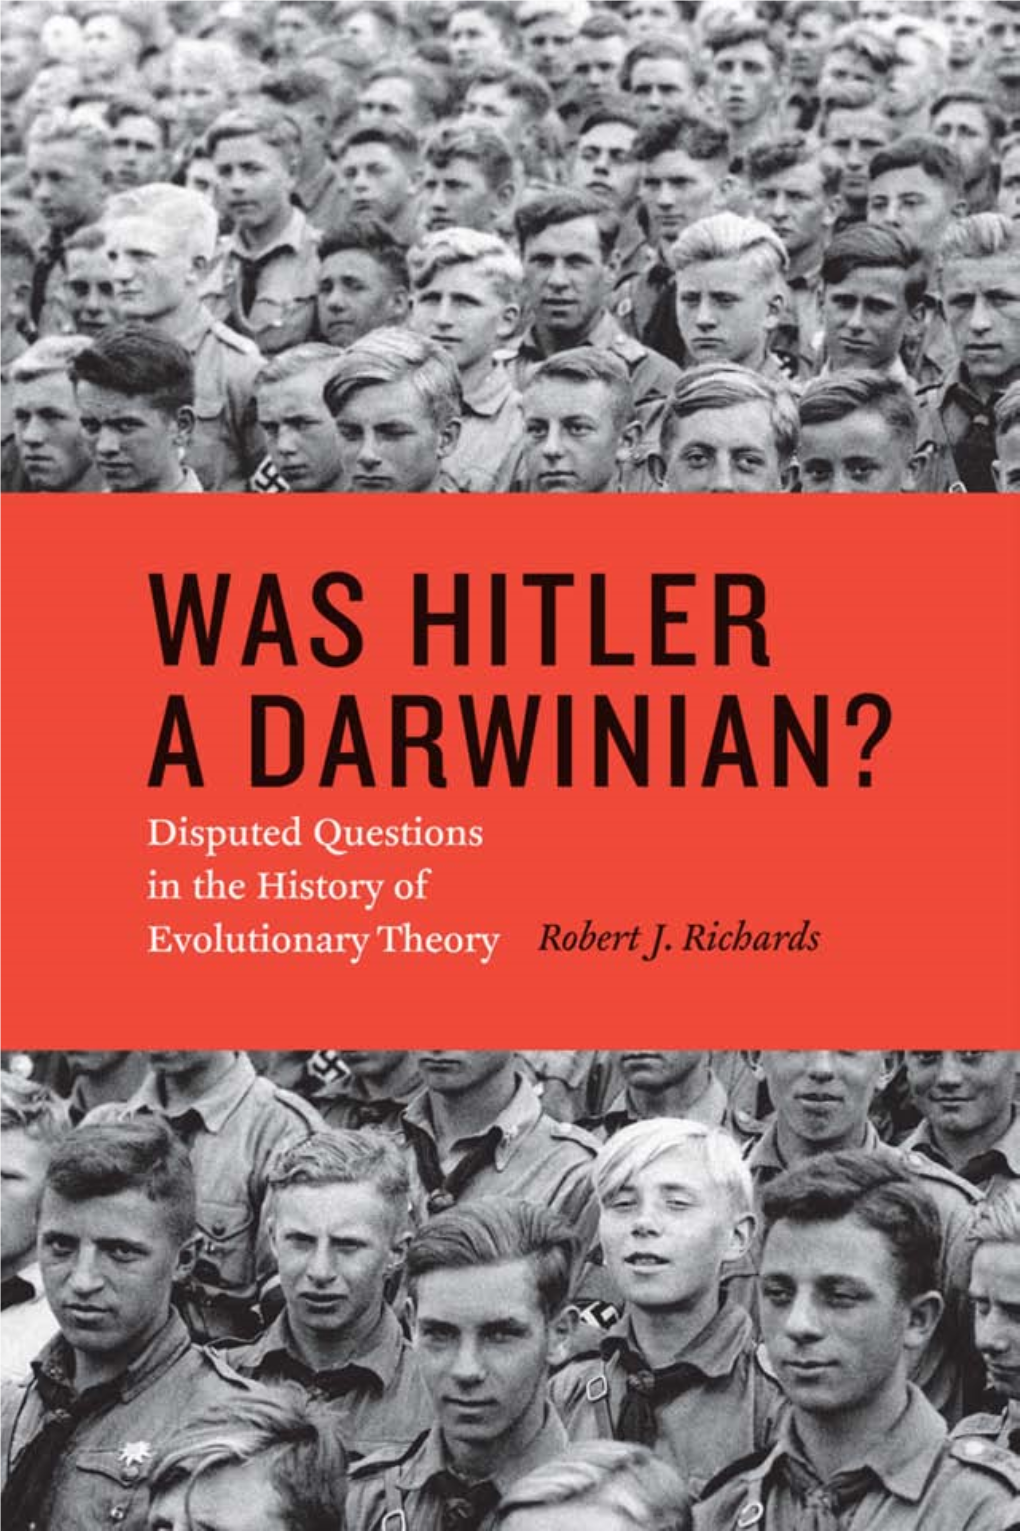 Was Hitler a Darwinian? Disputed Questions in the History of Evolutionary Theory Robert J